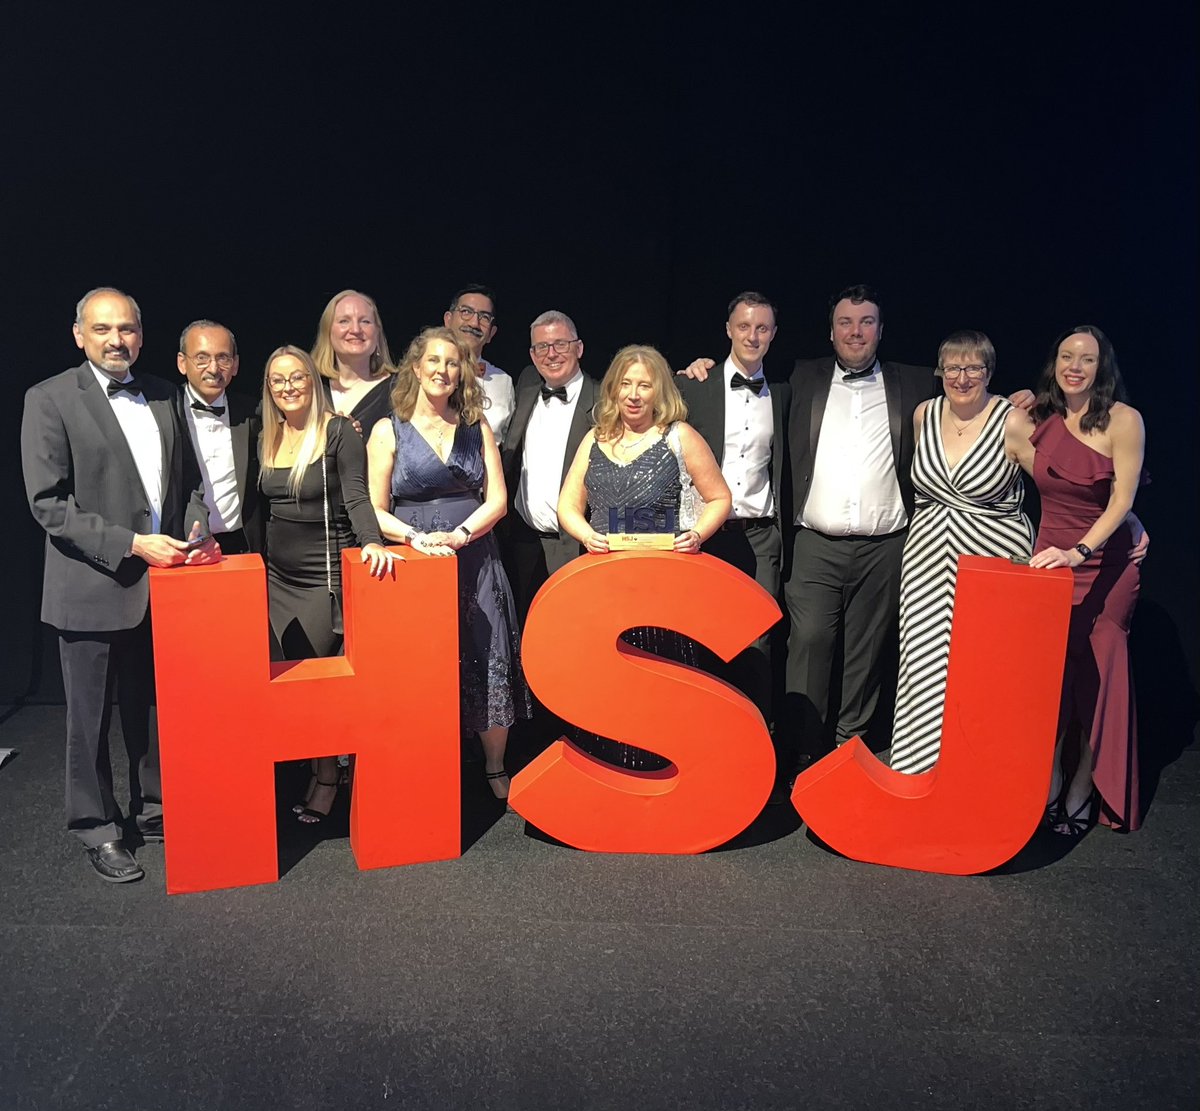 Winners in the Best Elective Care Recovery Initiative category @hsjpartnership @RoyalSurrey @OurRSFamily @DefinitionH18 Royal Surrey Preassessment with the LifeBox digital transformation tool in partnership with Definition Health